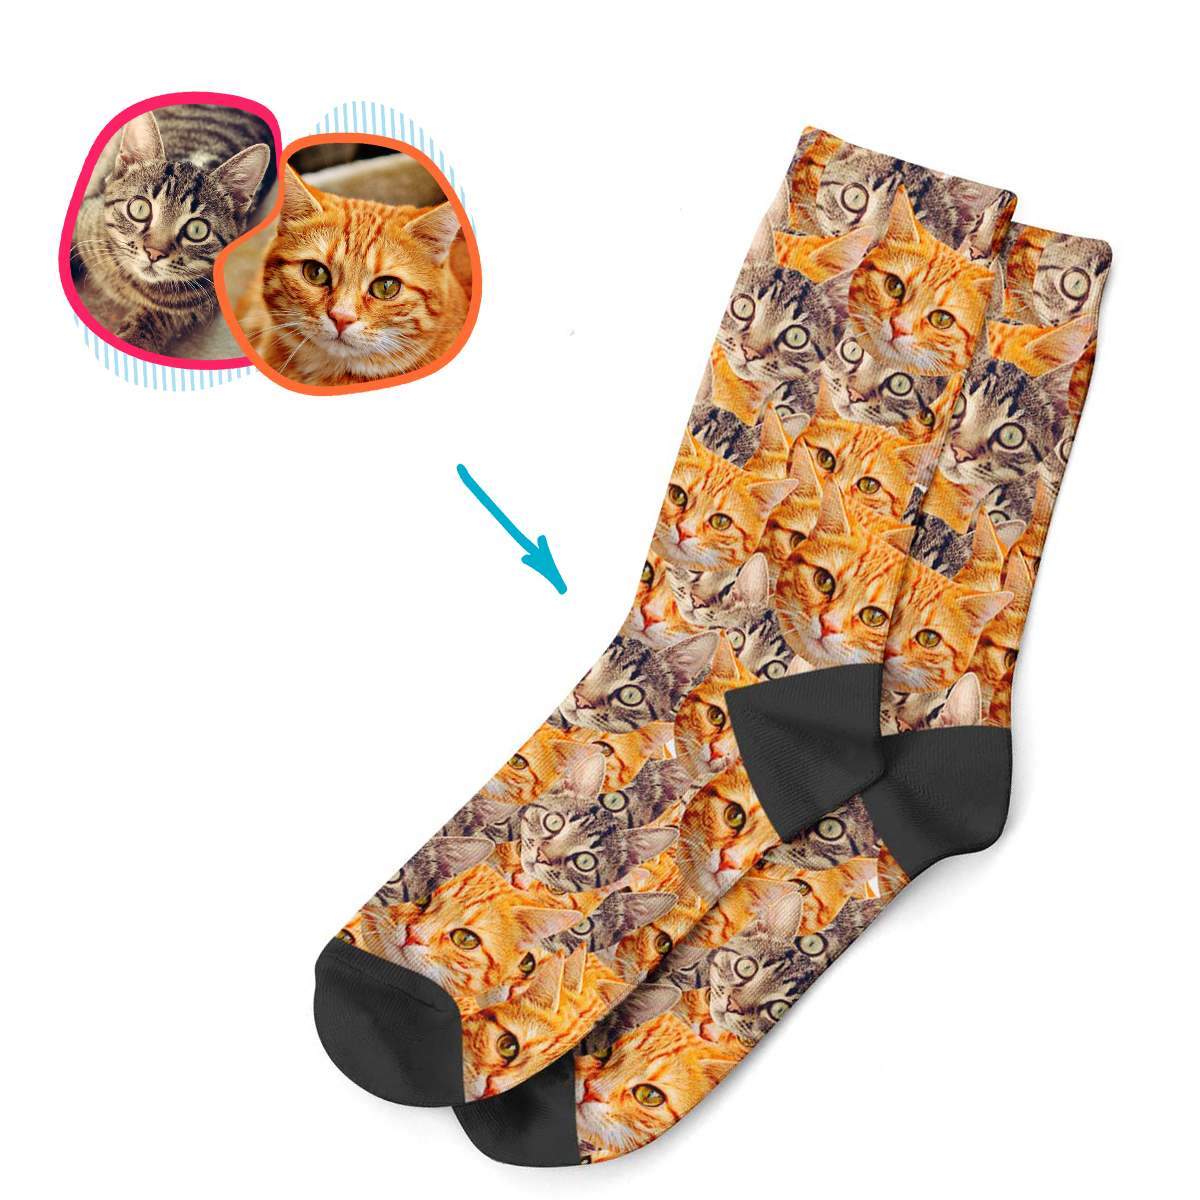 Cat Mash socks personalized with photo of face printed on them